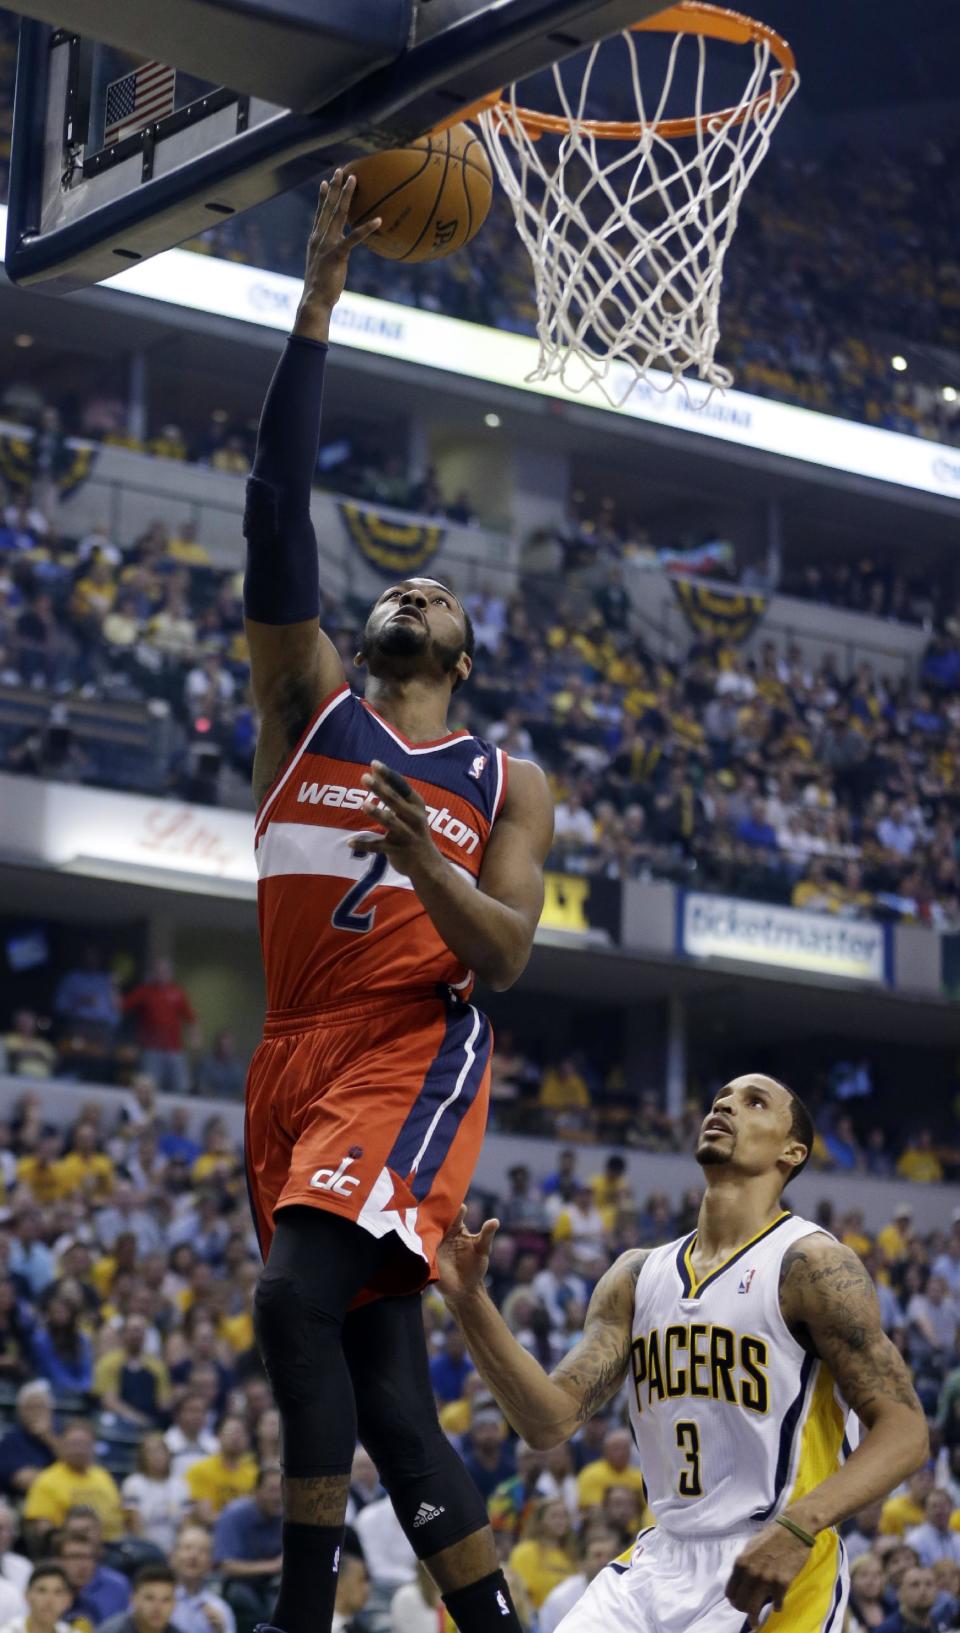 Washington Wizards' John Wall (2) puts up a shot over Indiana Pacers' George Hill (3) during the first half of game 5 of the Eastern Conference semifinal NBA basketball playoff series Tuesday, May 13, 2014, in Indianapolis. (AP Photo/Darron Cummings)